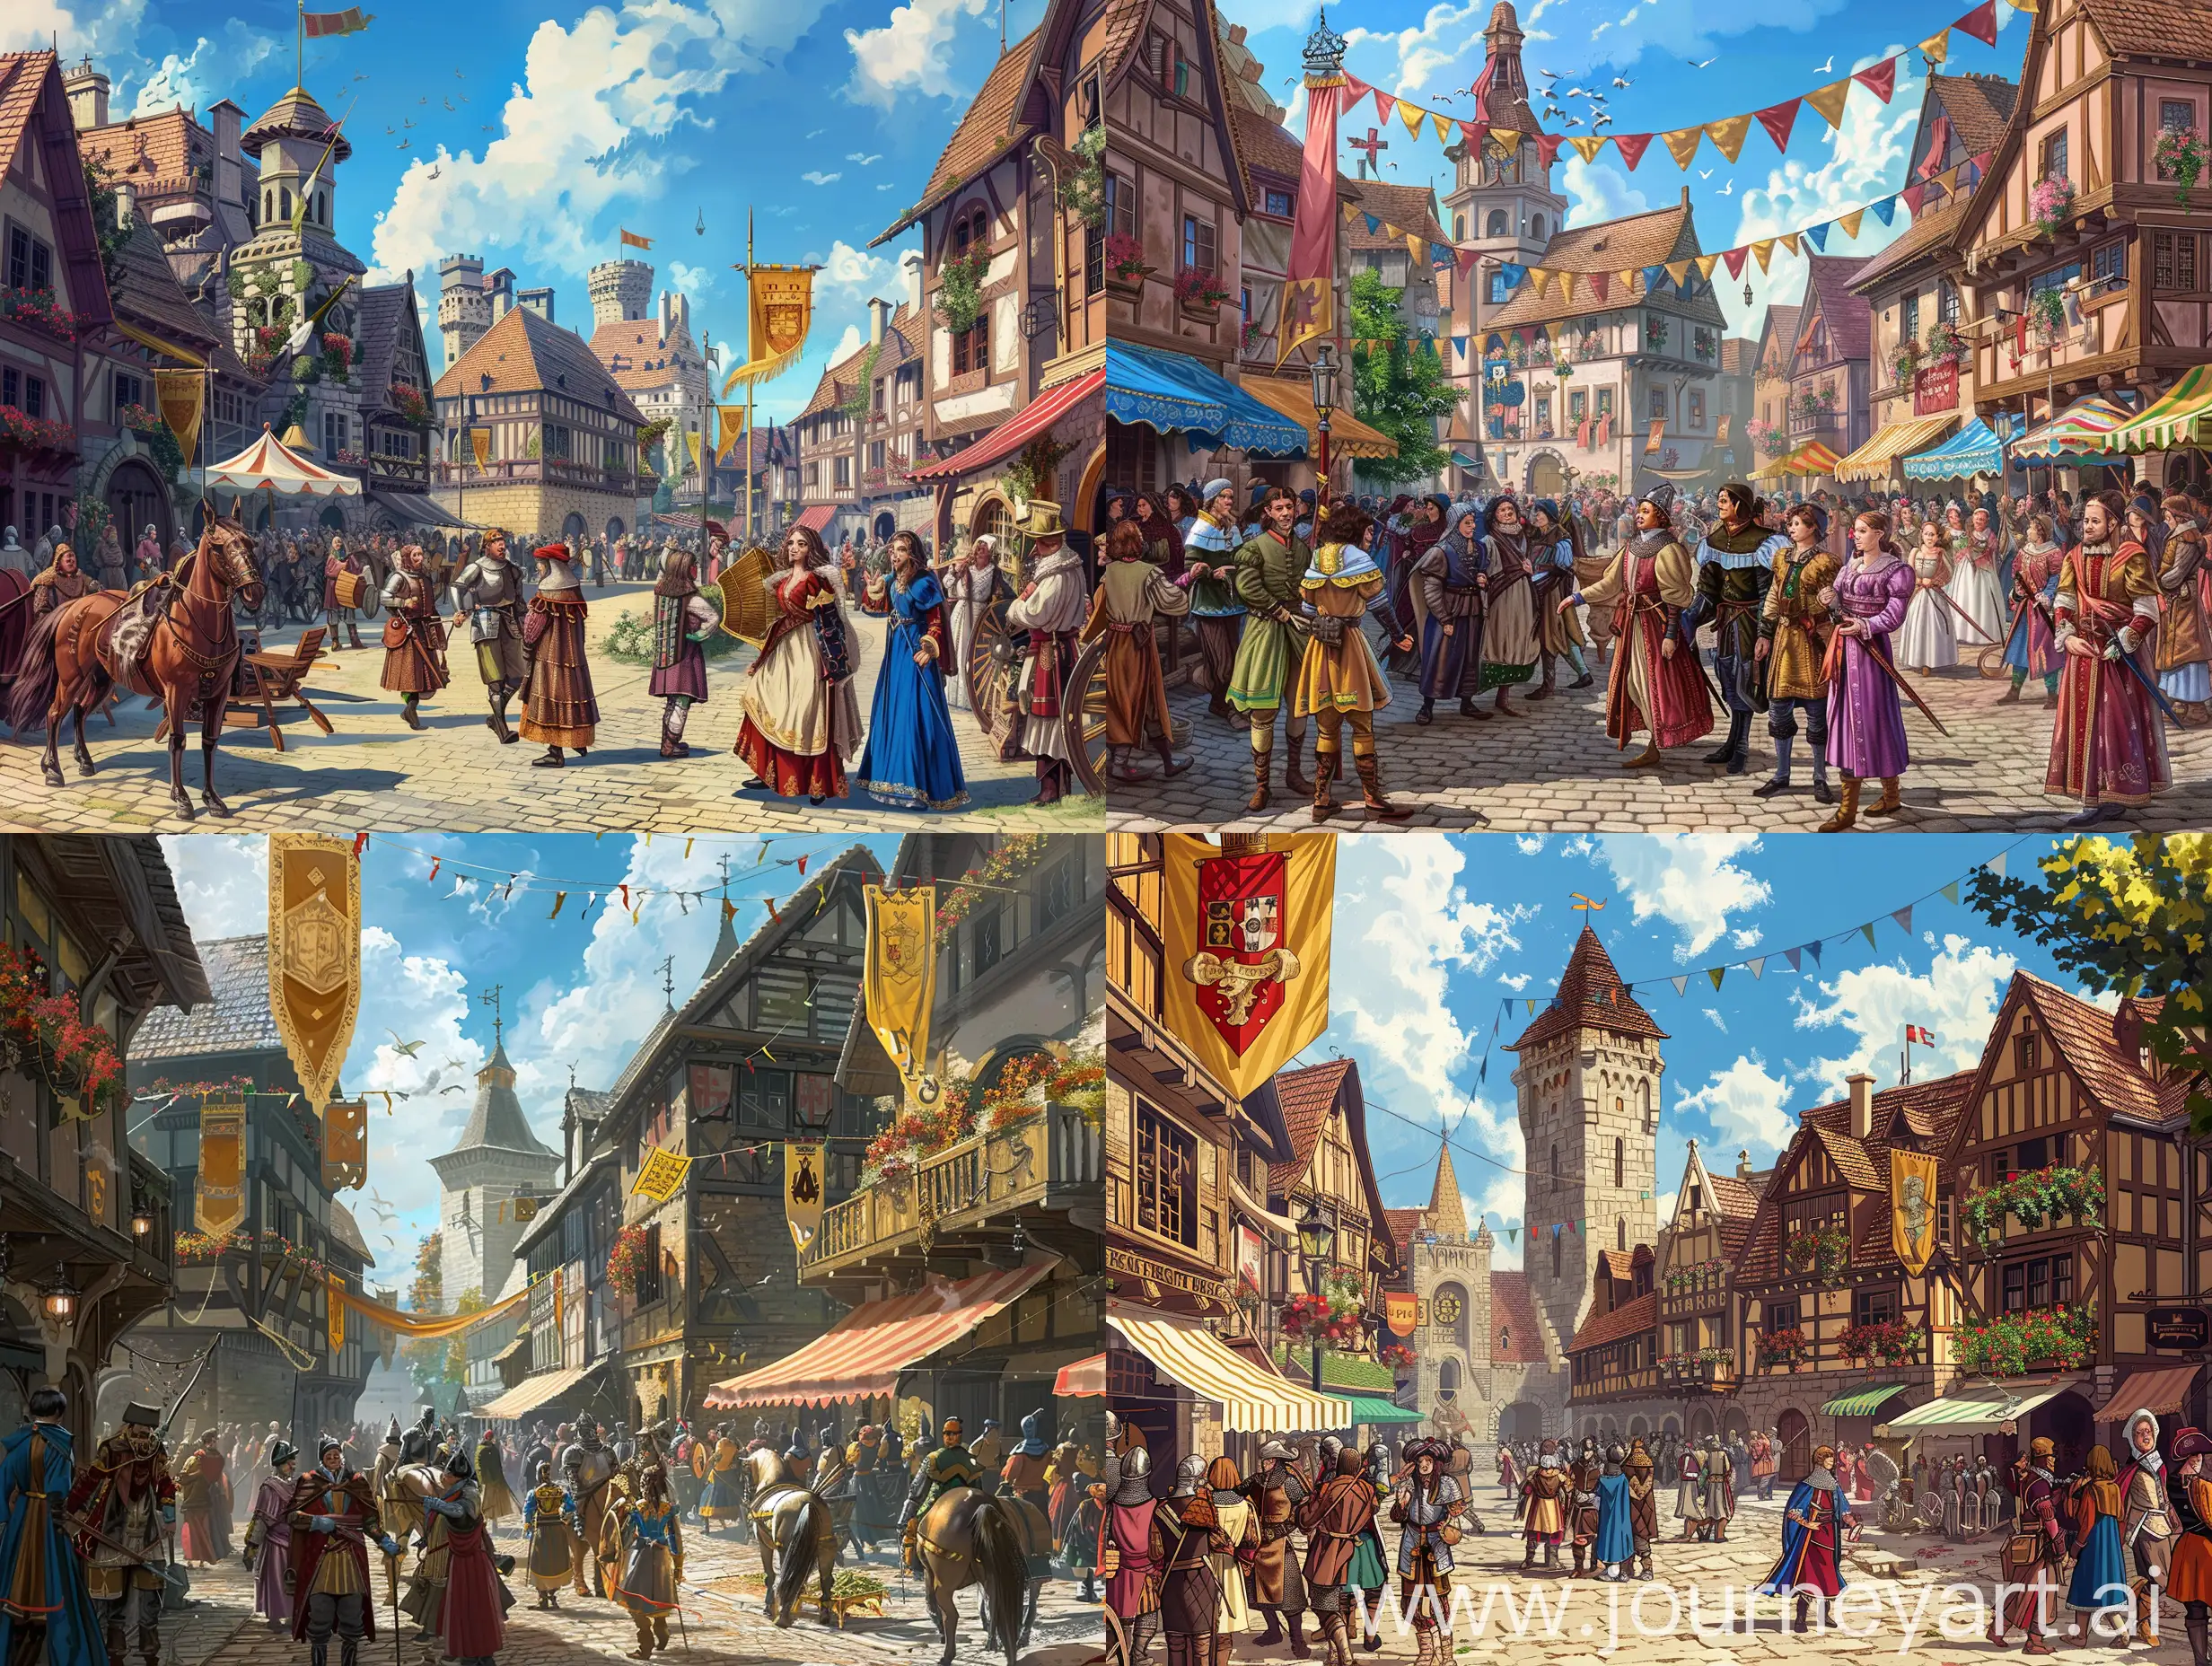 Vibrant-Medieval-Town-Square-with-16th-Century-Costumes-and-Architecture